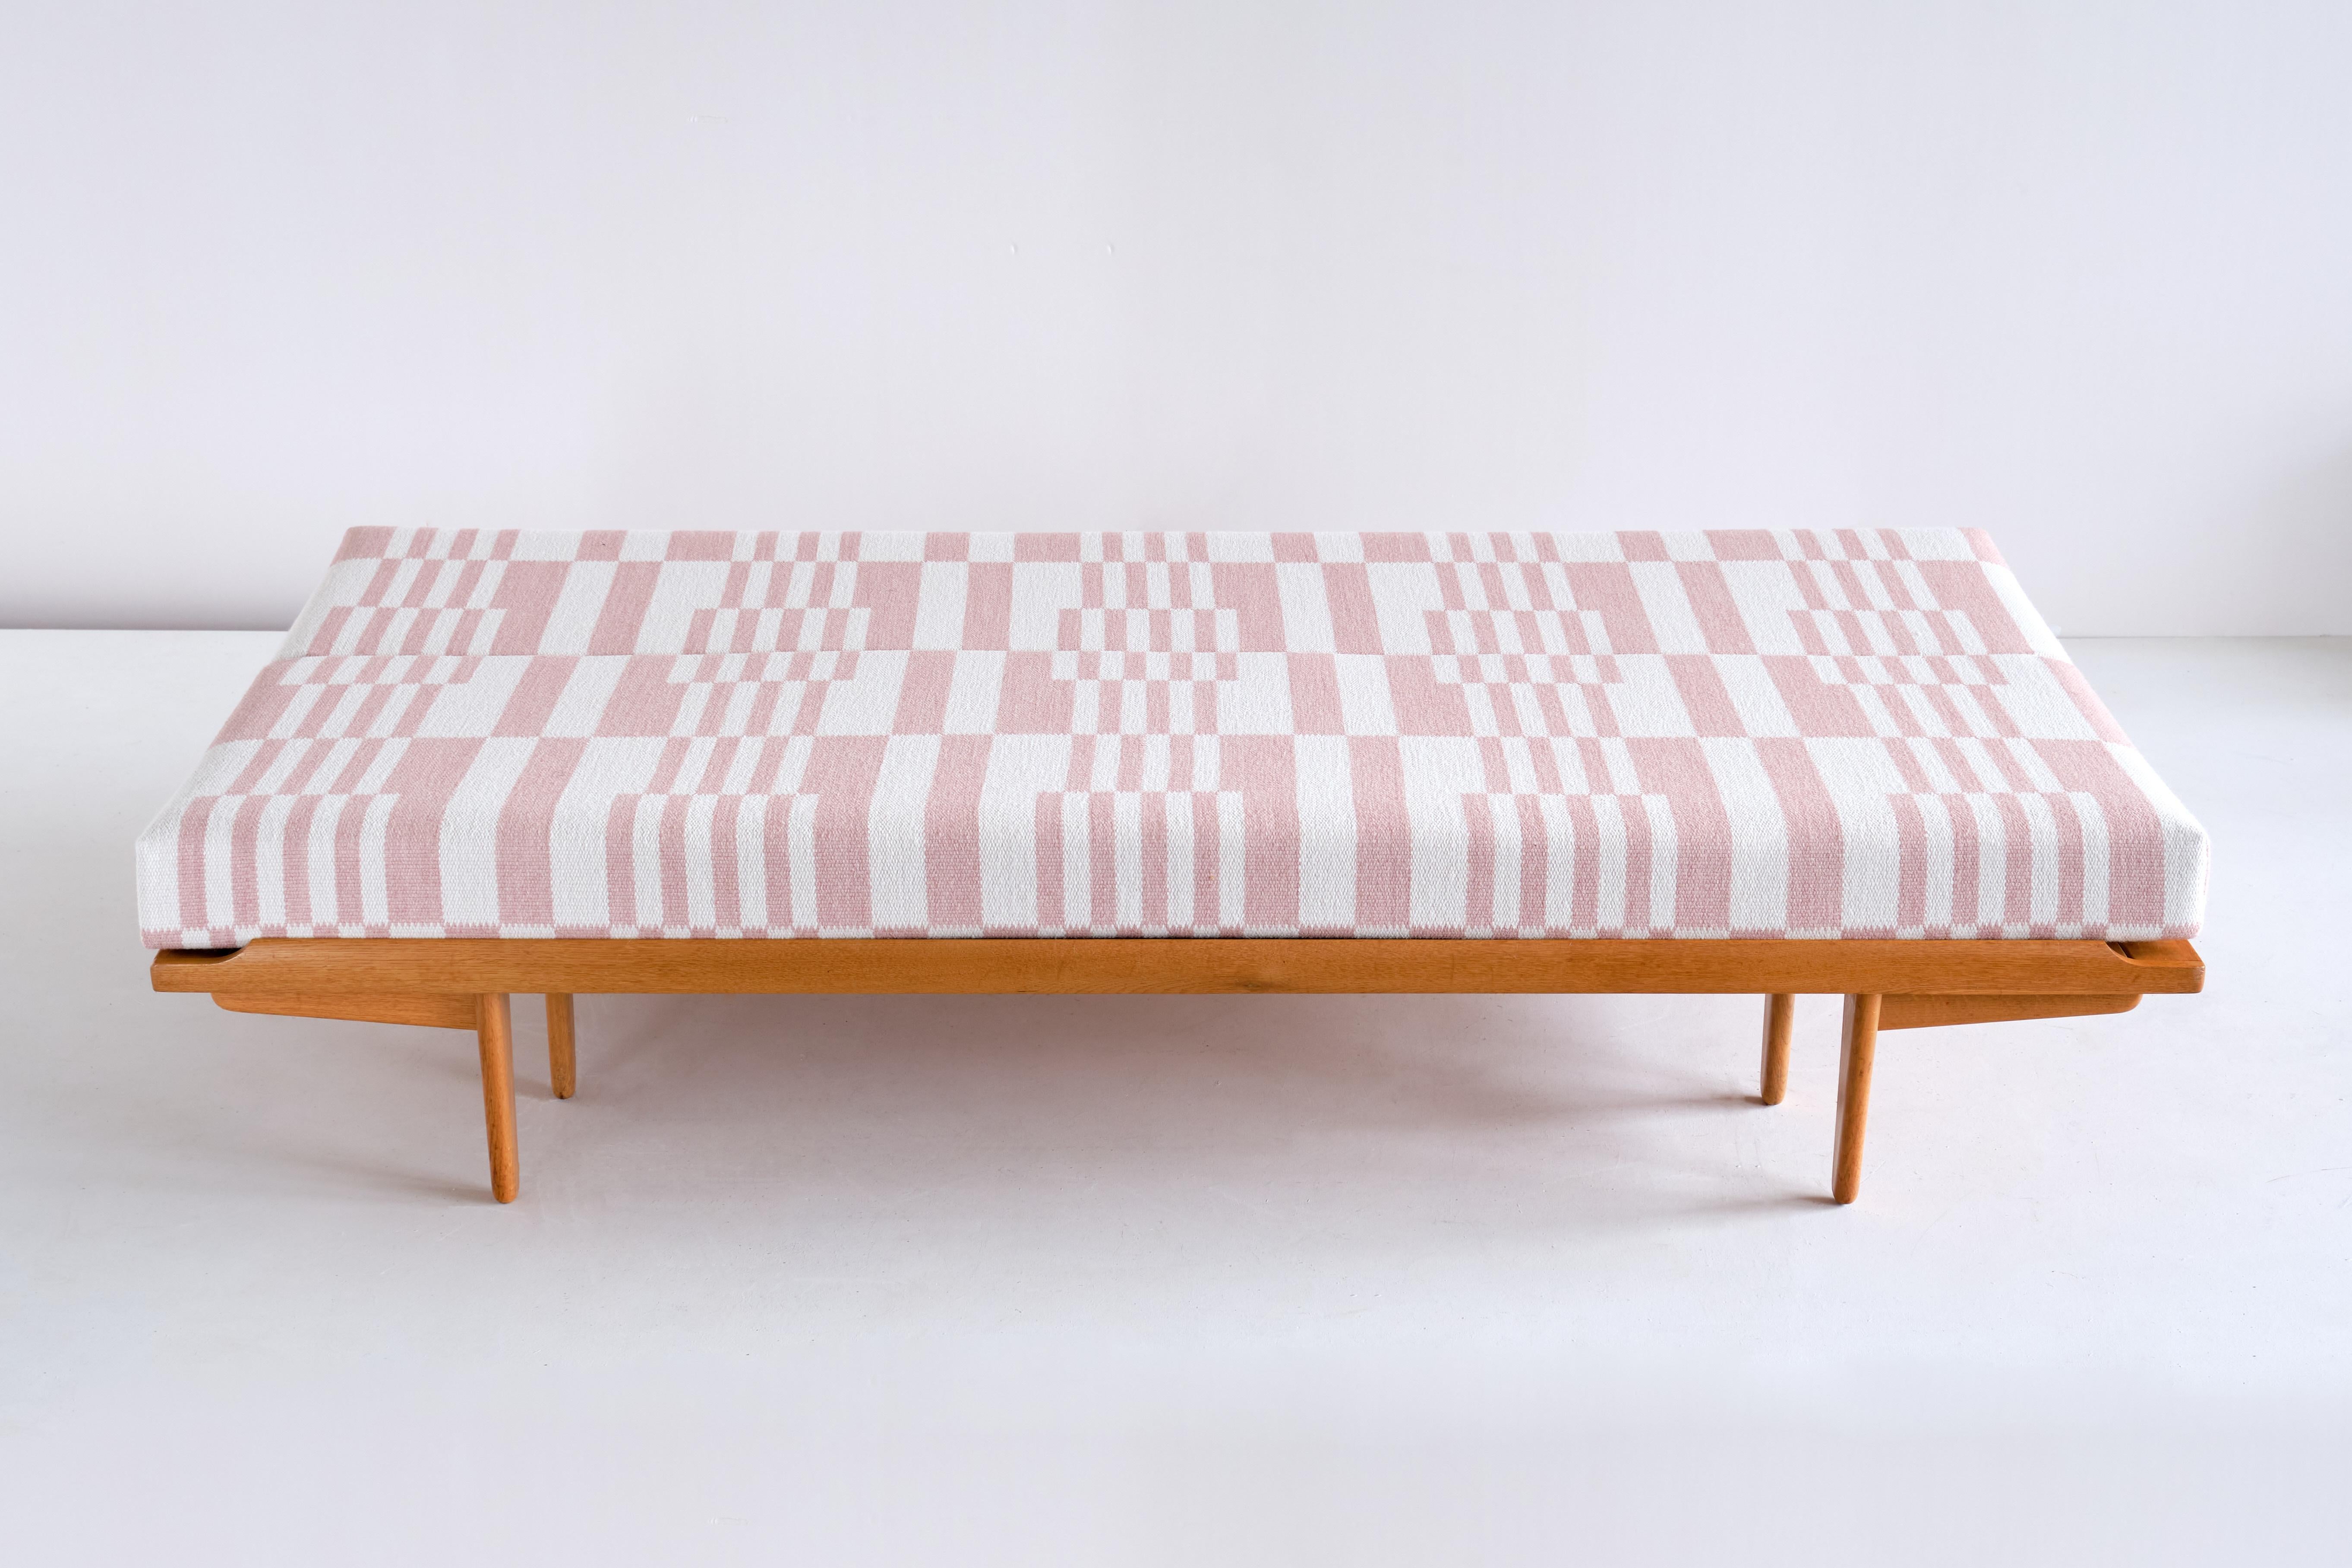 Poul Volther Sofa / Daybed in Oak and Pierre Frey Fabric, Gemla, Sweden, 1955 For Sale 5